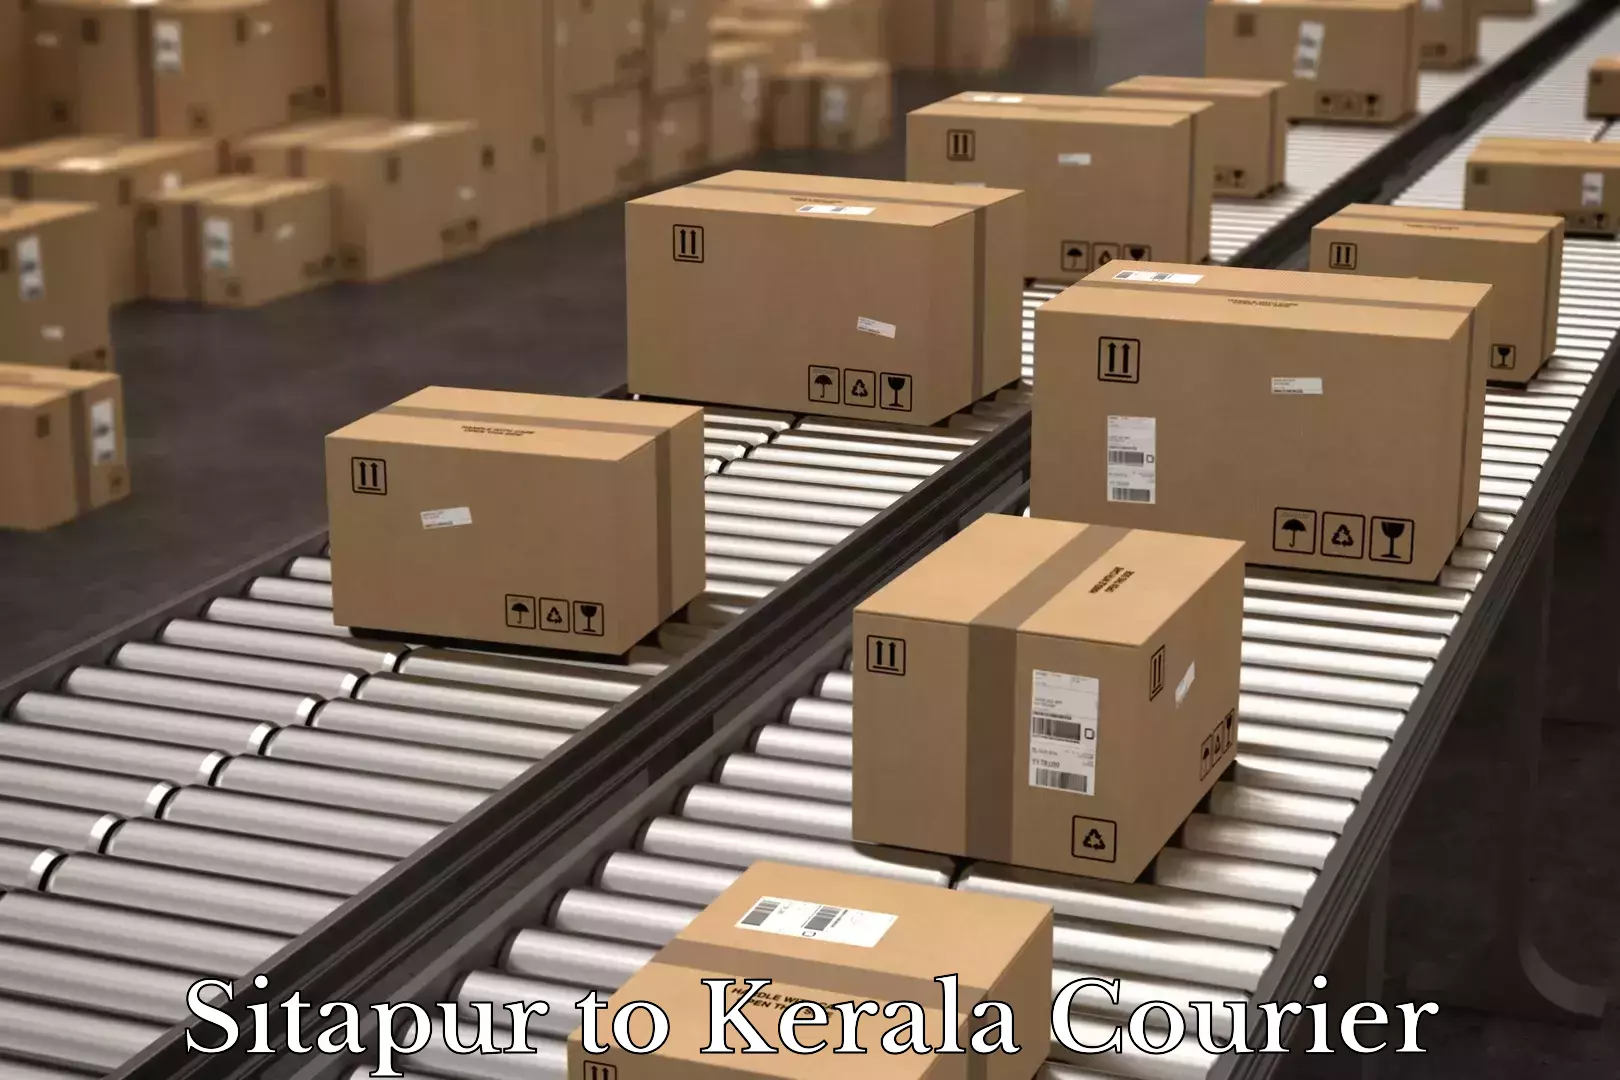 Automated luggage transport Sitapur to Kerala